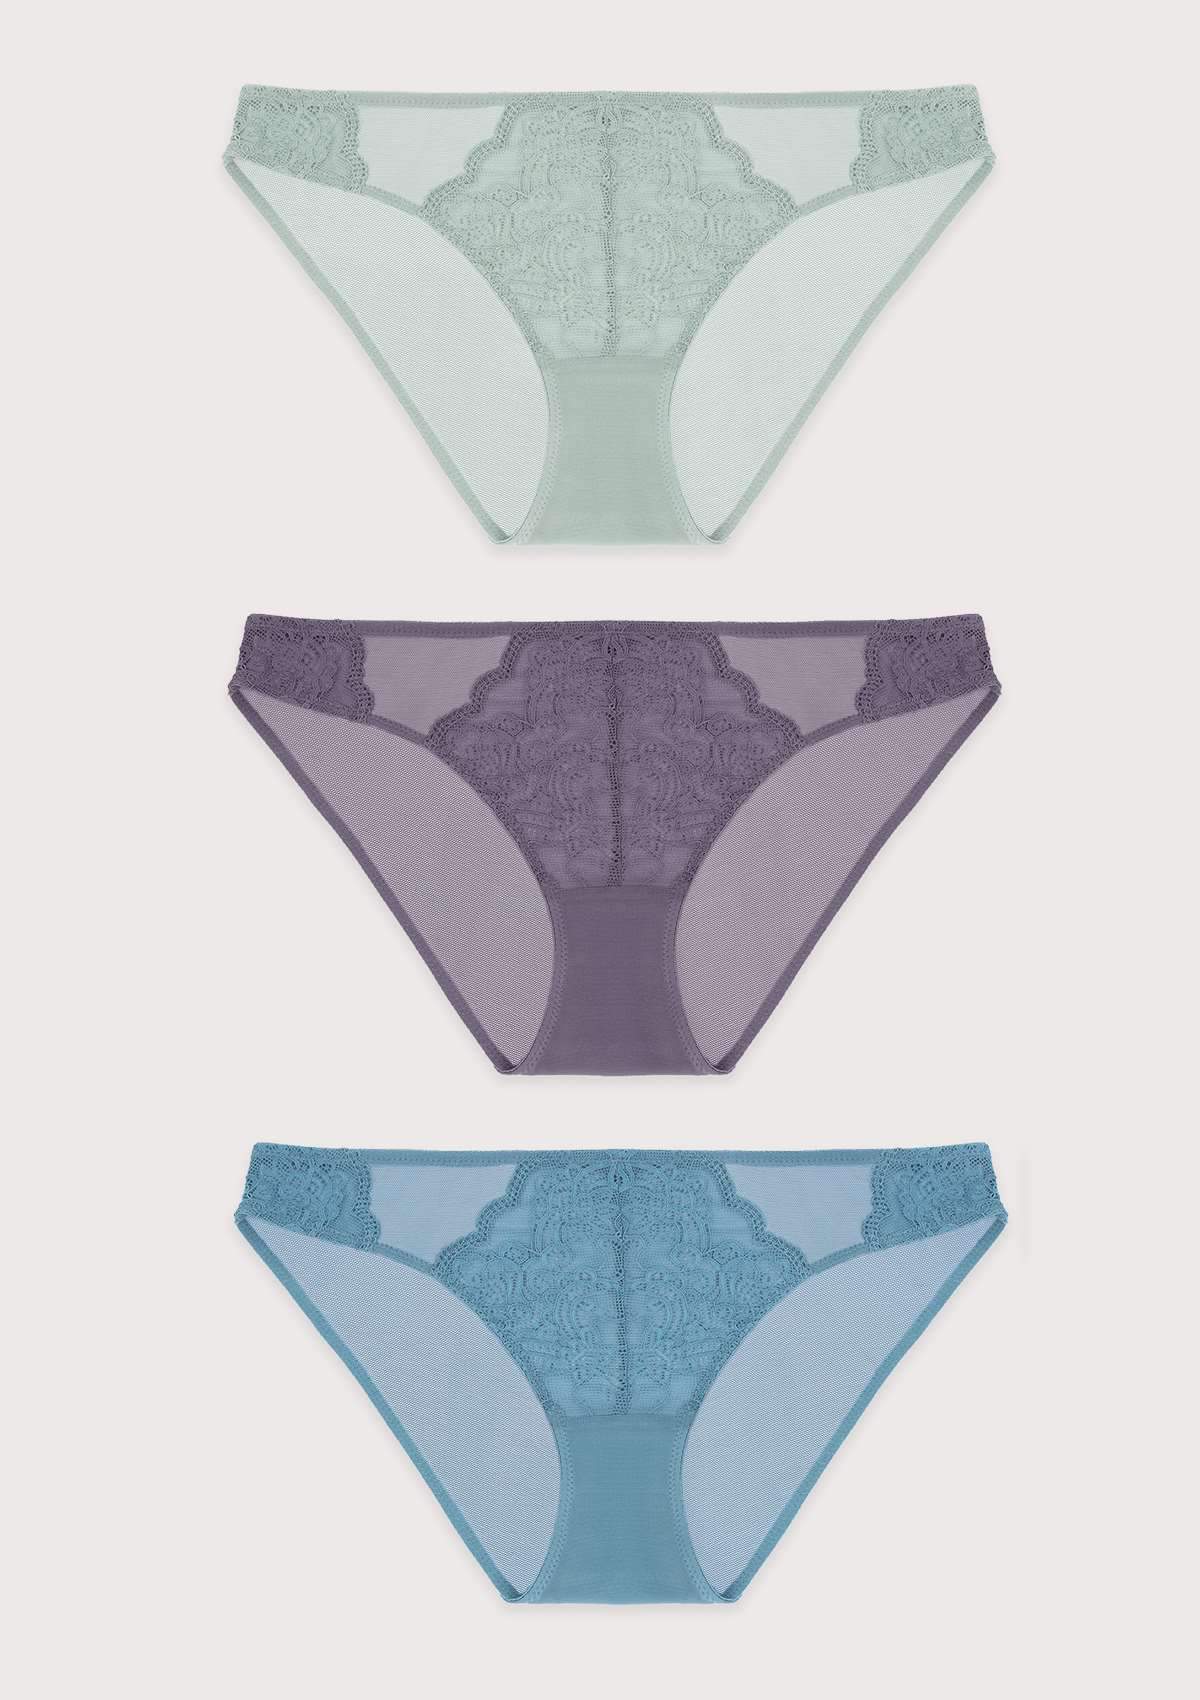 HSIA Floral Lace Front And Sheer Mesh Back Airy Bikini Panties -3 Pack - S / Green+Purple+Blue